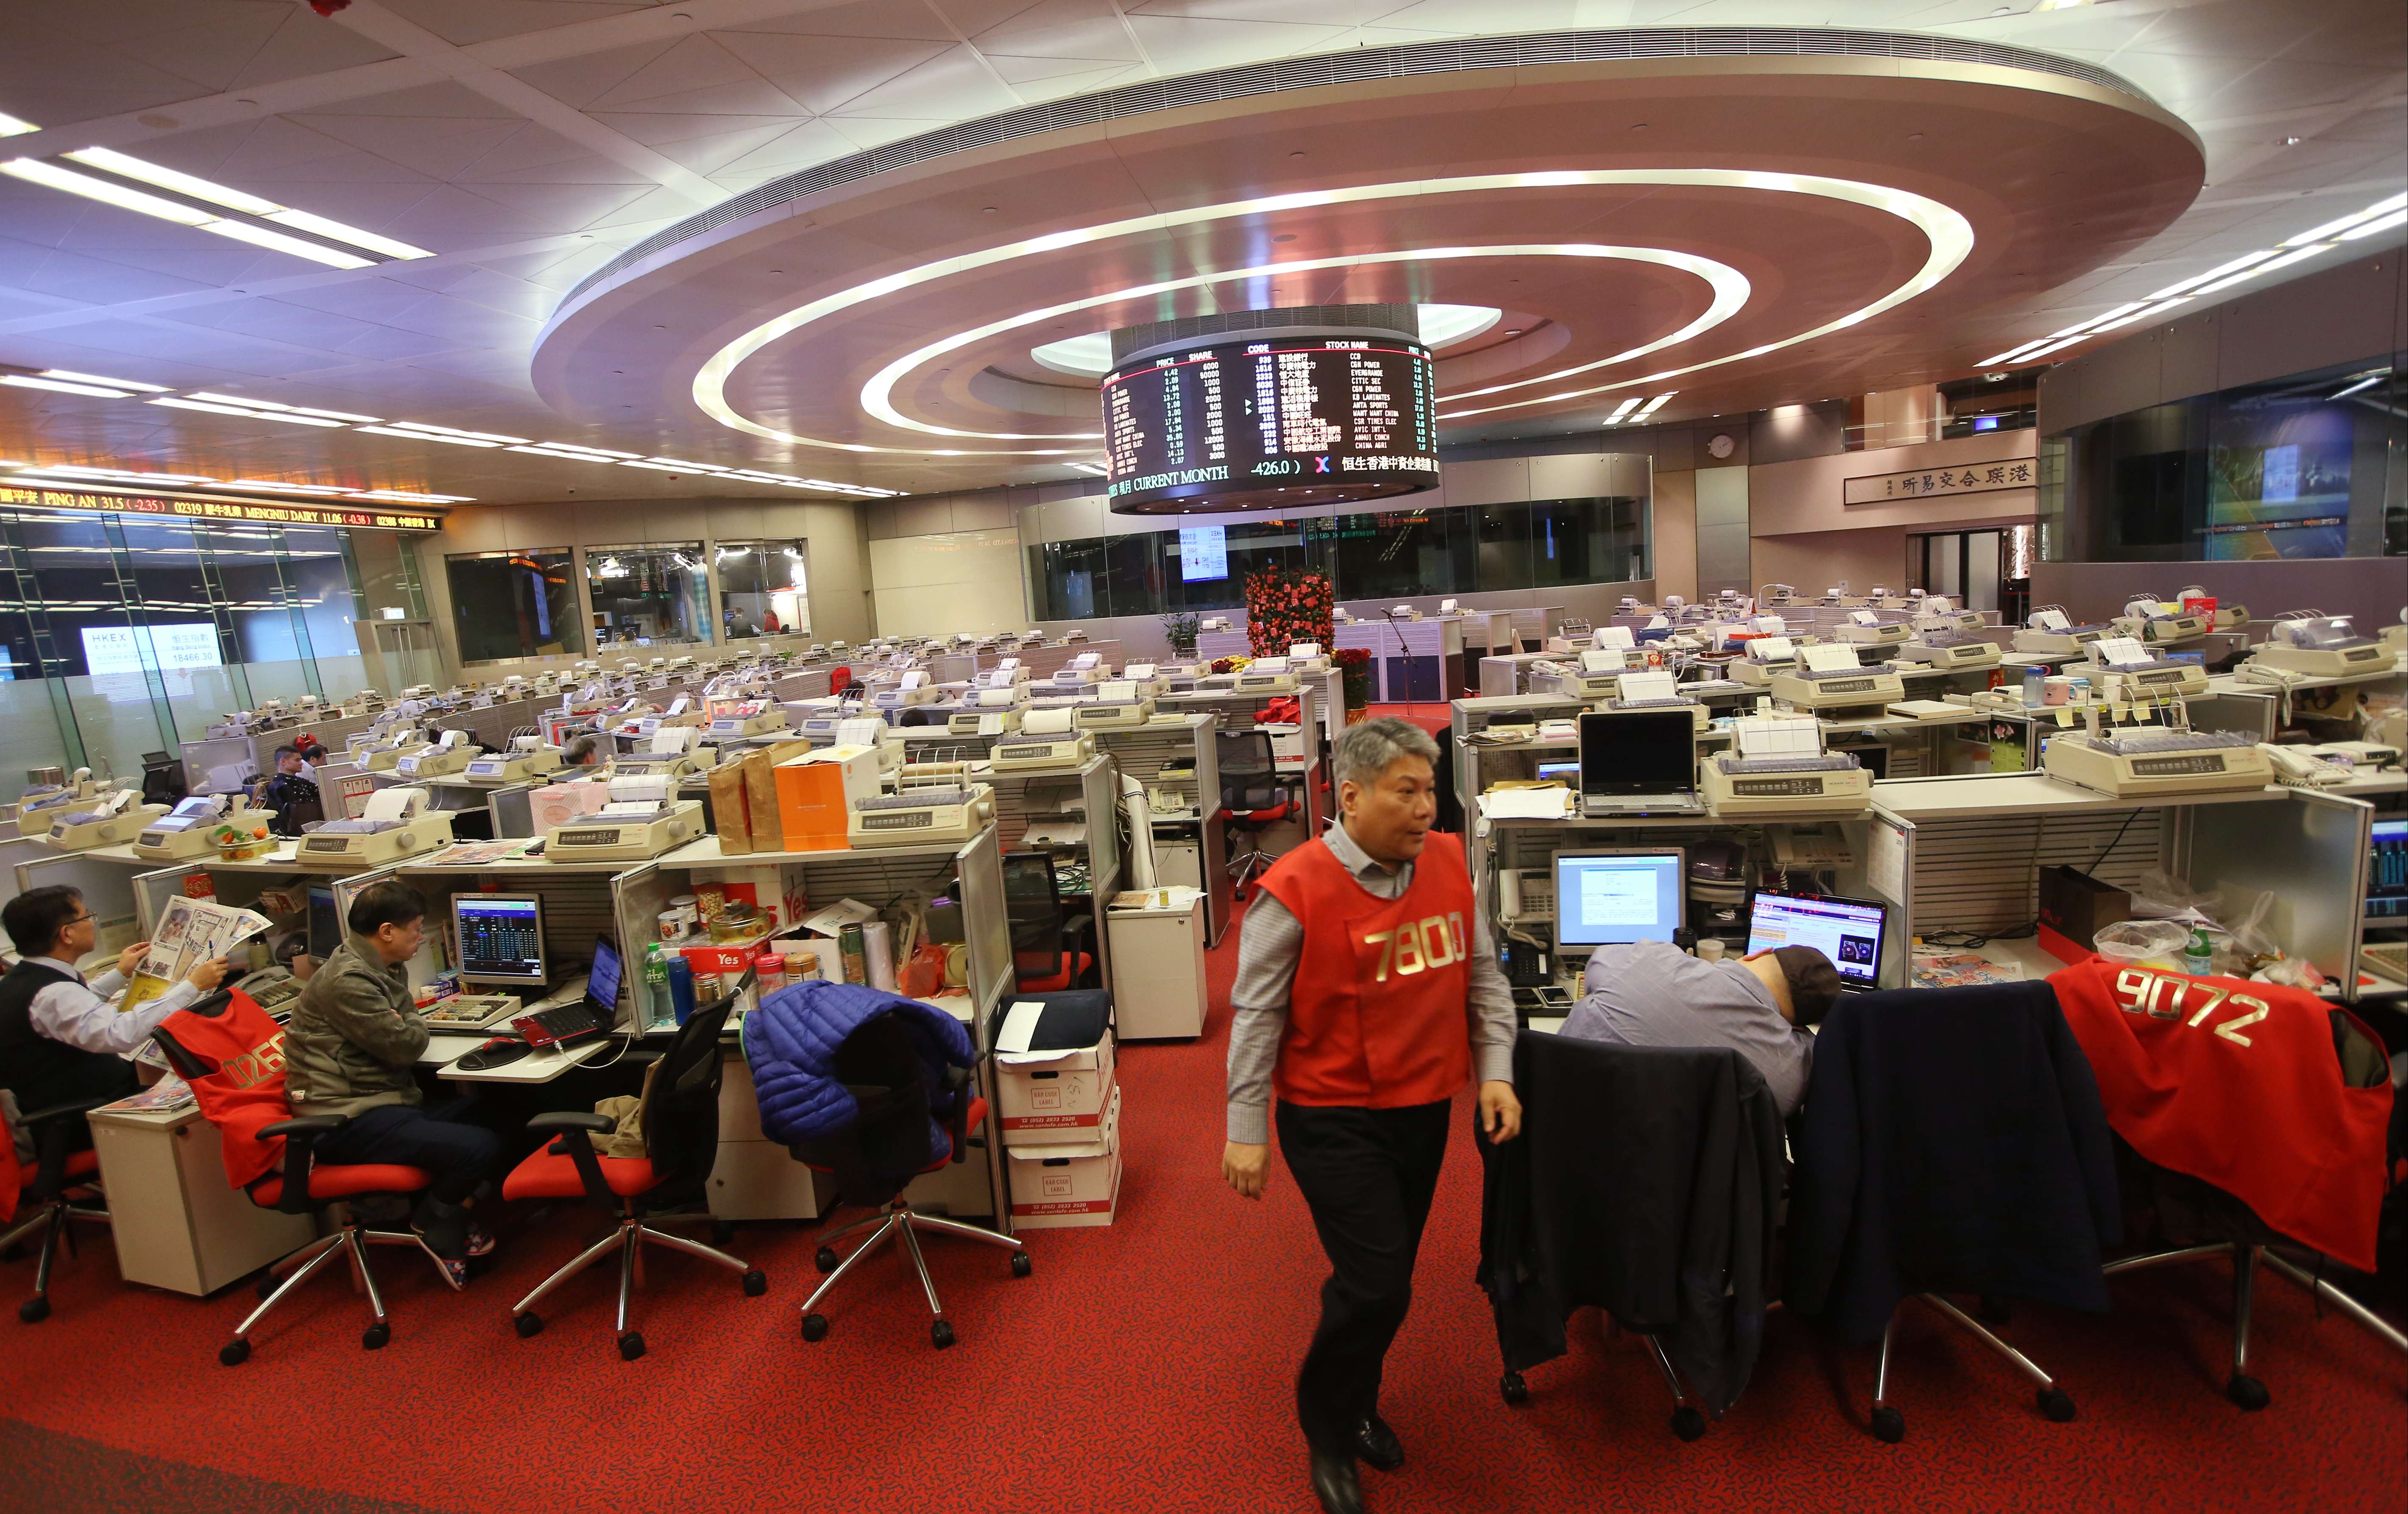 Hong Kong Exchanges and Clearing’s proposed third board could expand investment opportunities, its proponents say, but critics say its role should be distinct. Photo: Sam Tsang